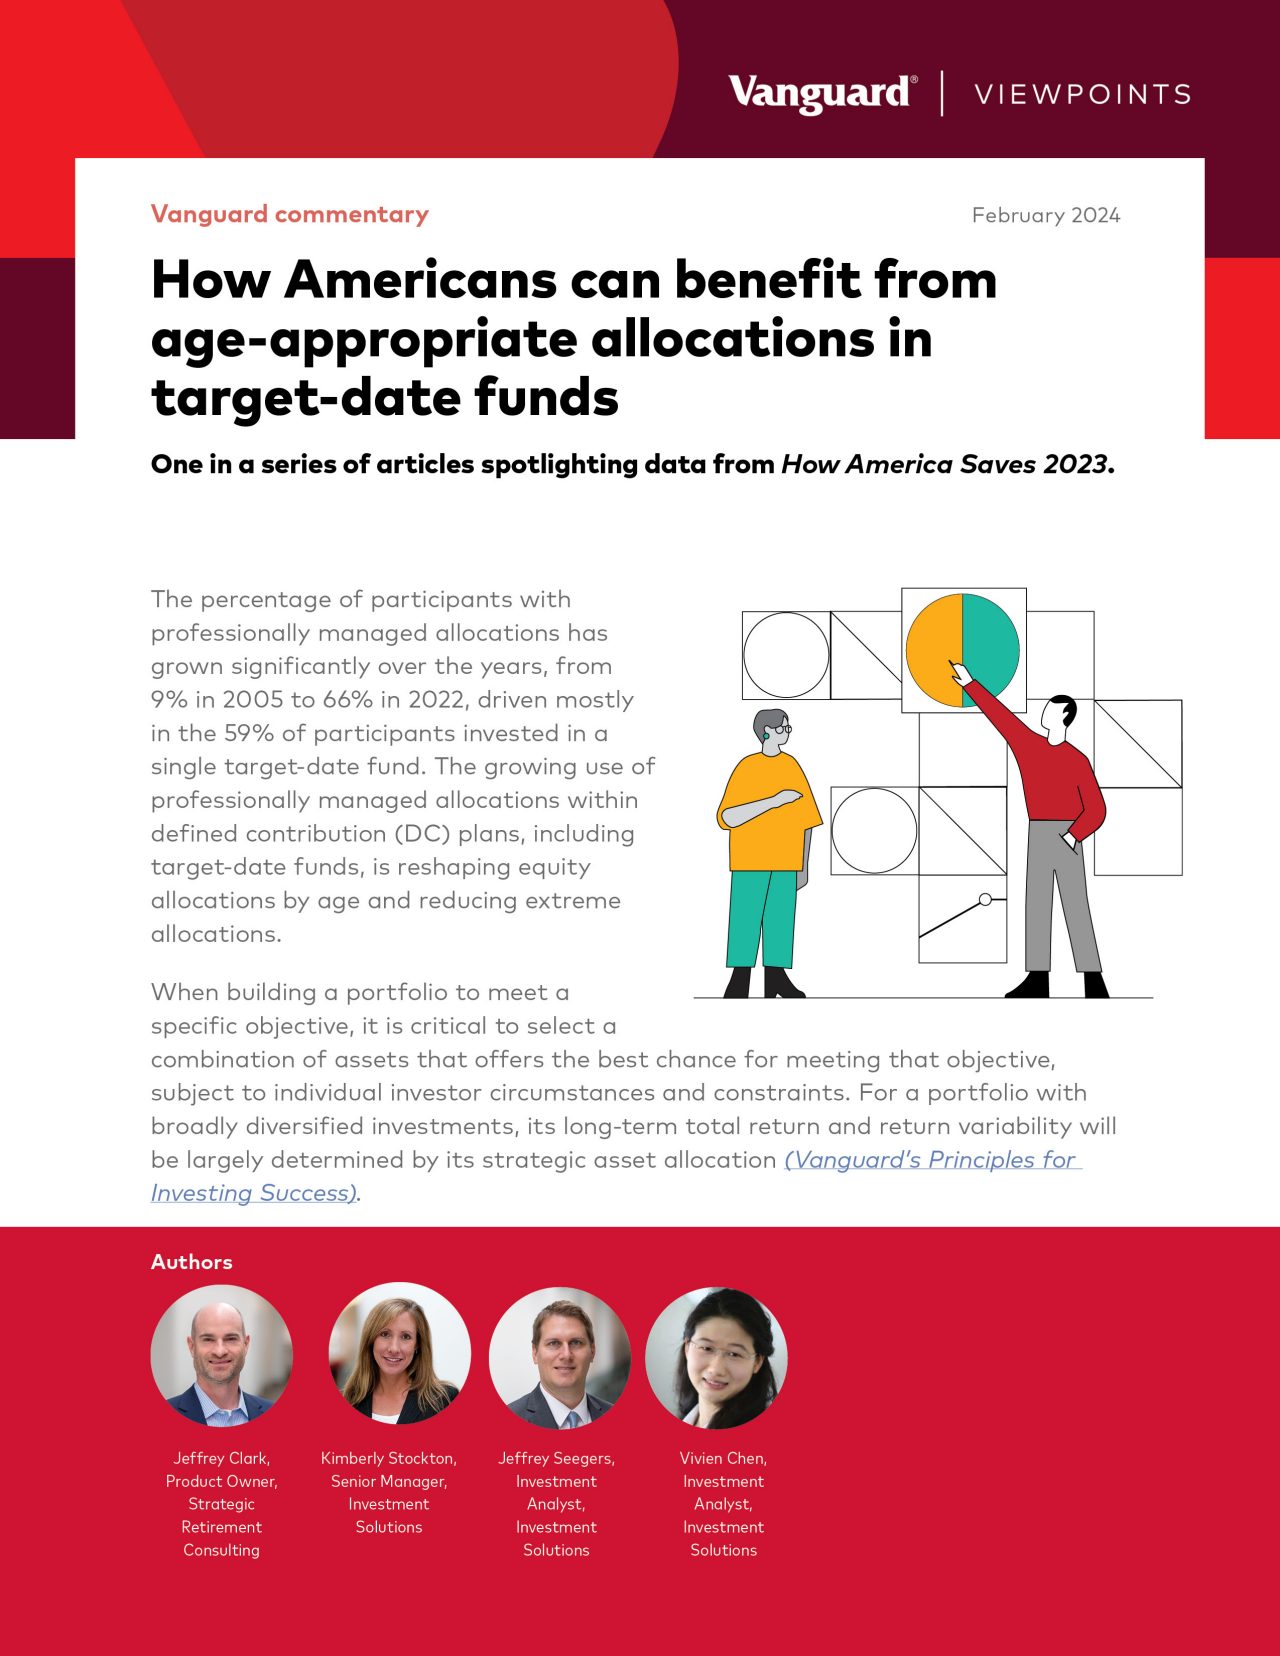 A thumbnail image of the webpage featuring the commentary called “How Americans can benefit from age-appropriate allocations in target-date funds.” 